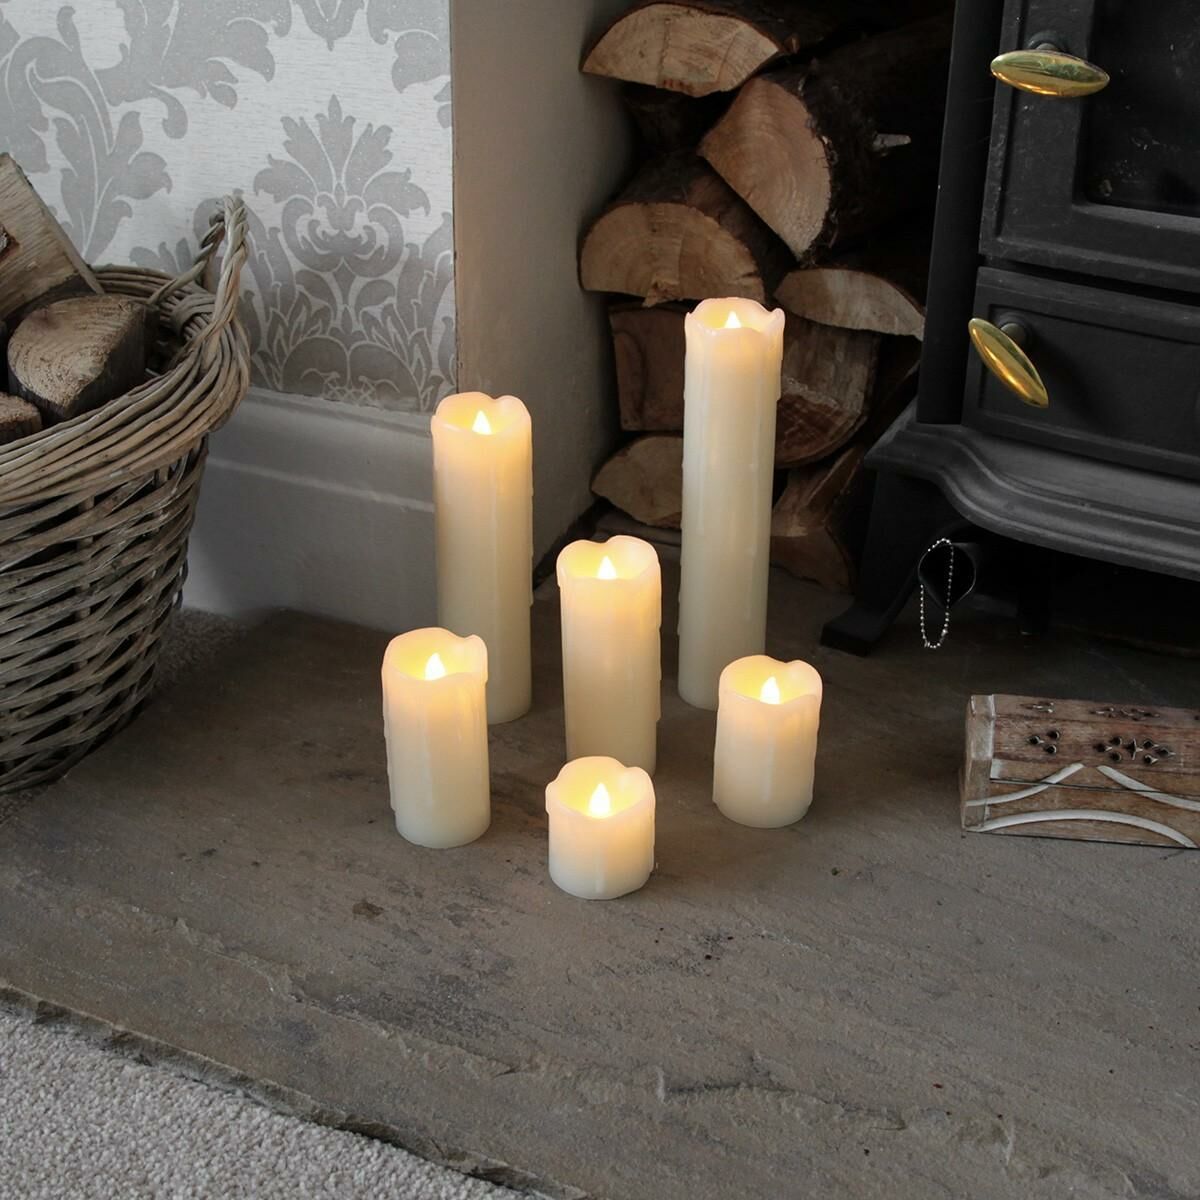 6 Battery Flickering Dripping Wax Pillar LED Candles image 6